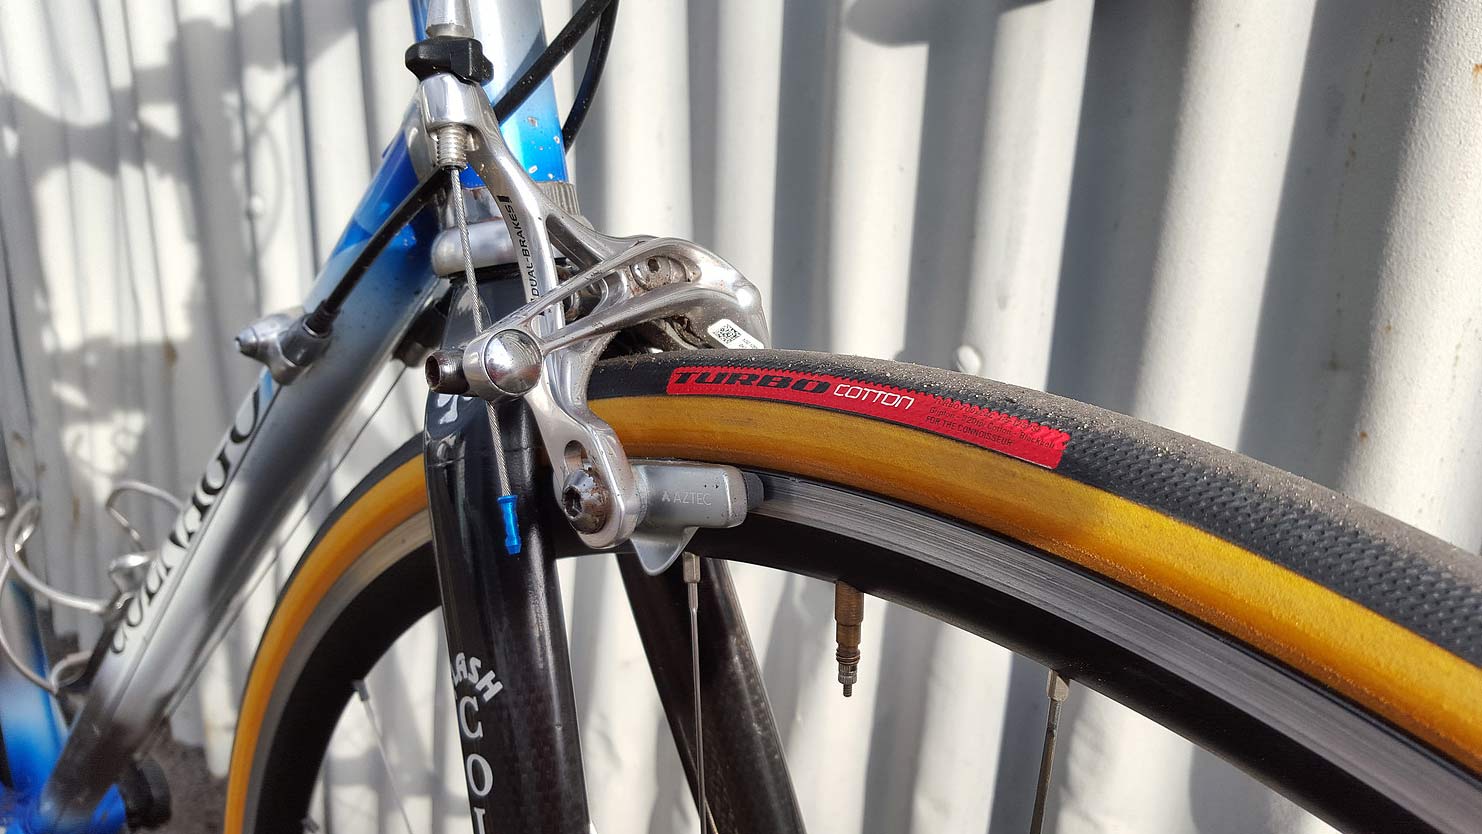 Speialized S-works turbo cotton tyres fitted to the colnago tecnos